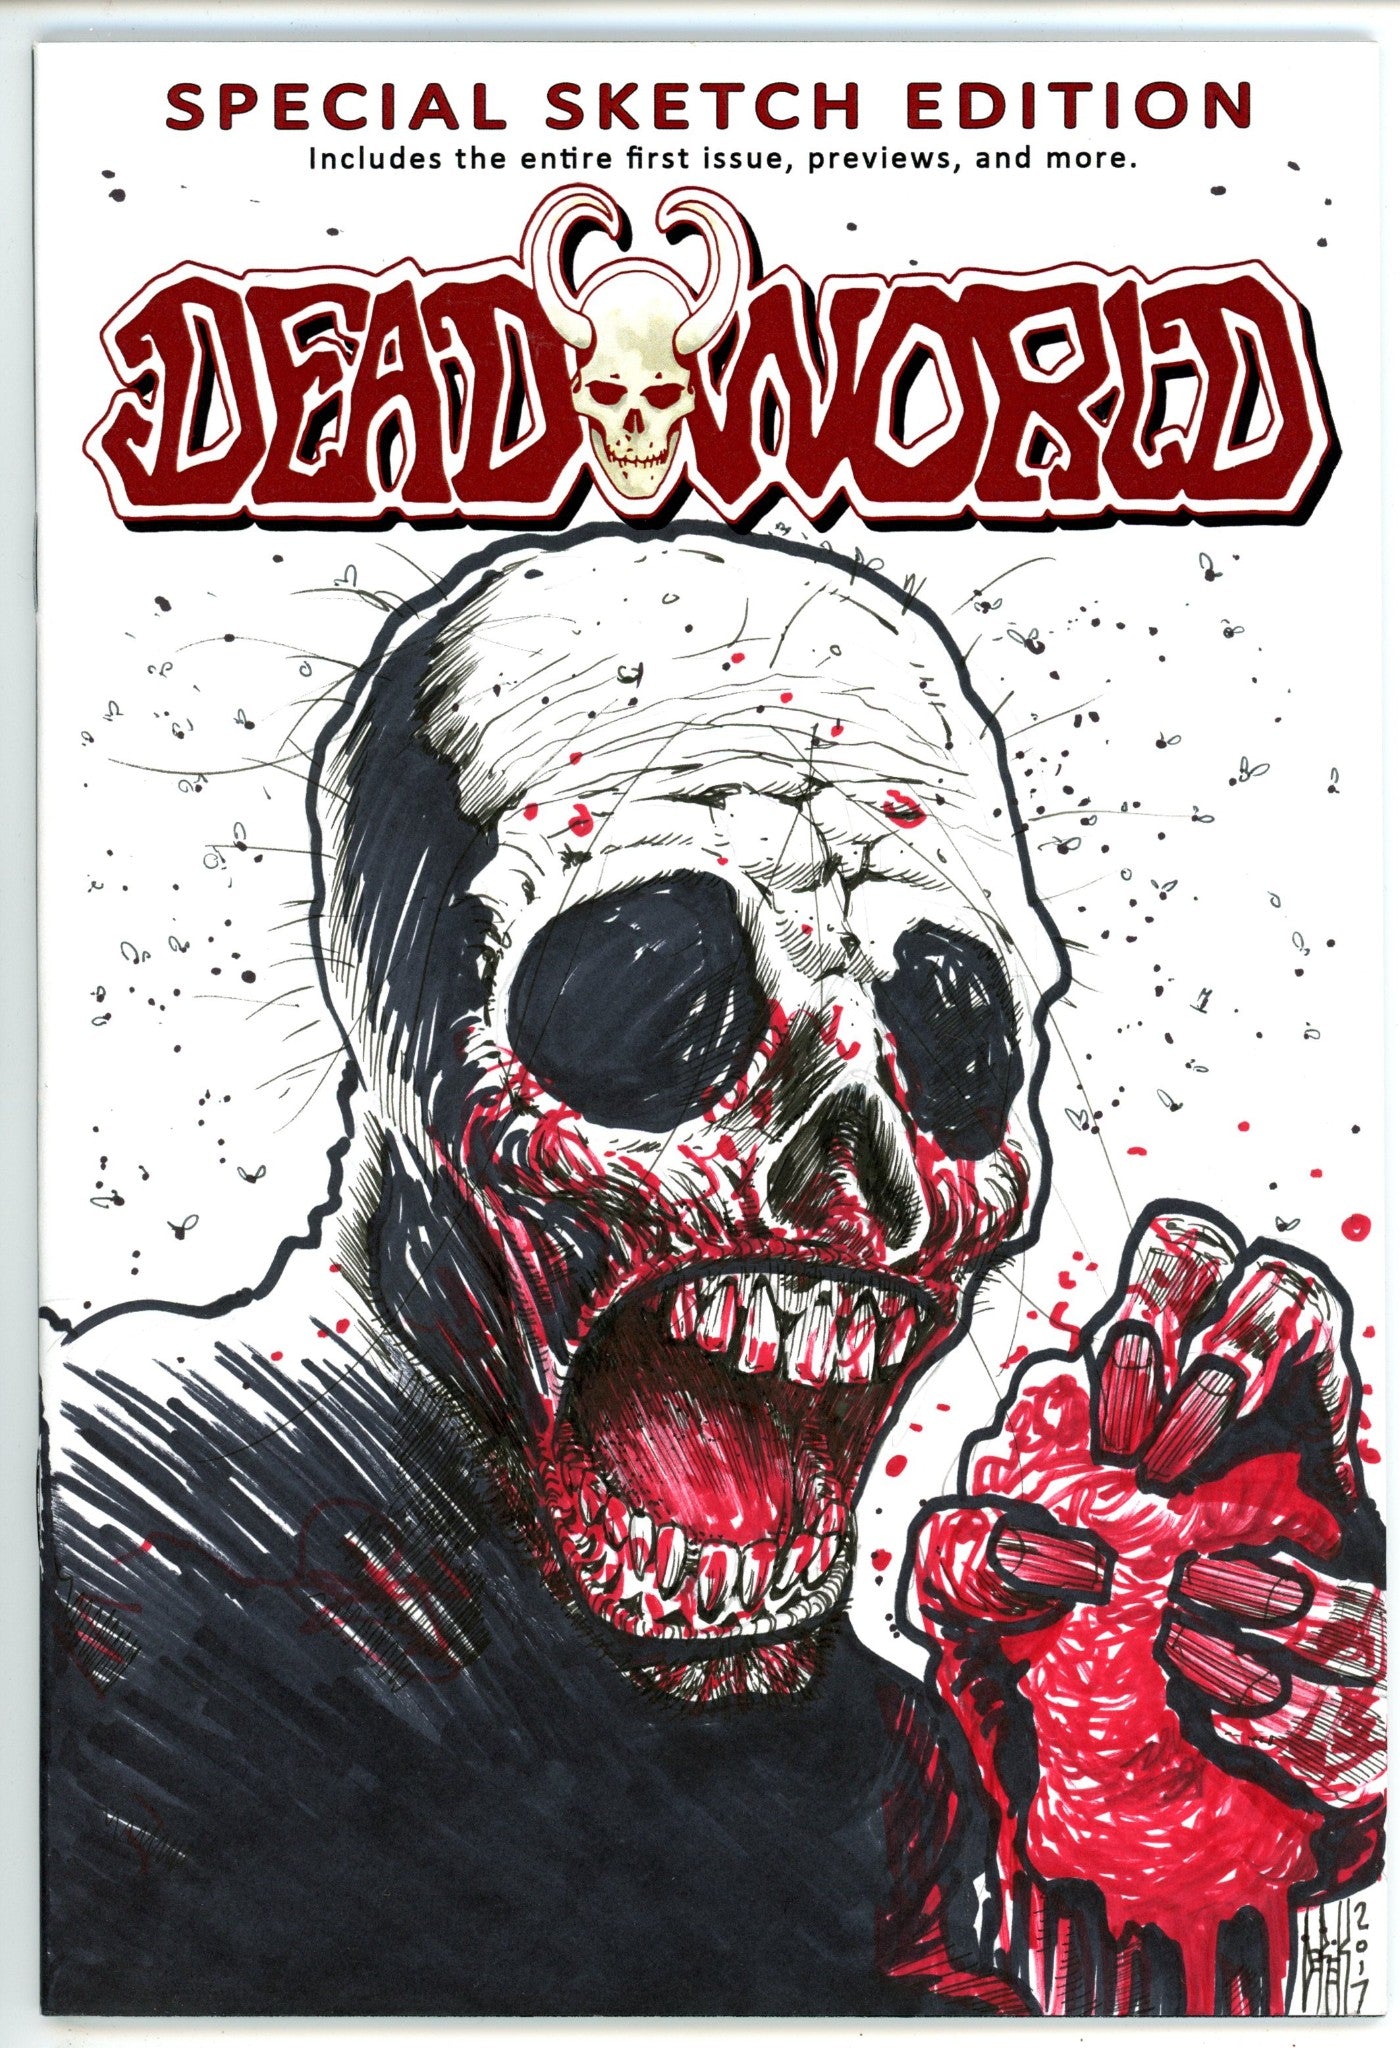 Deadworld: Special 1 VF/NM (9.0) (2014) Blank Variant Signed / Remarked x1 Cover Derek Rook 